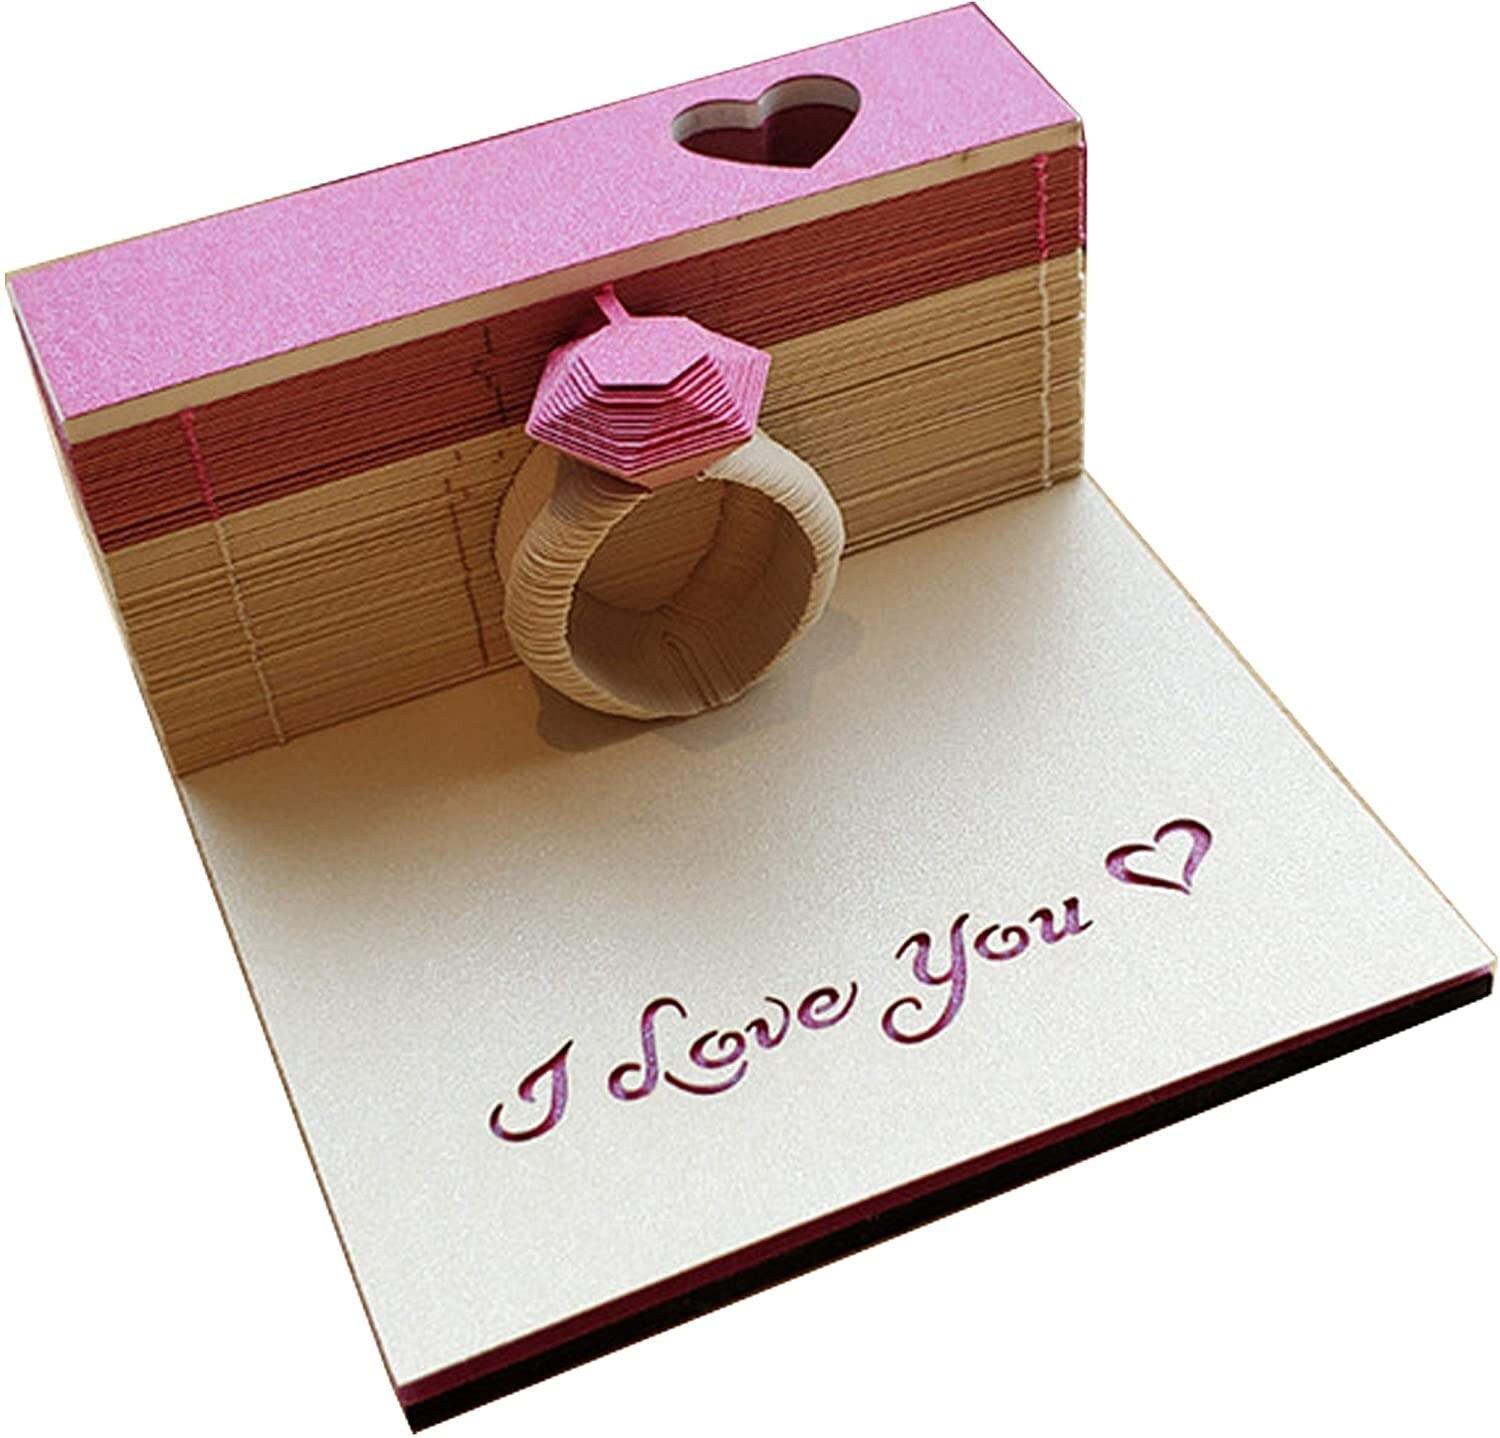 Proposal Ring 3D Note Pad - Creative Memo Pad - Omoshiroi Block - Romantic Gift - Engagement Ring - Gift For Love - Stationery Toys With LED - Rajbharti Crafts